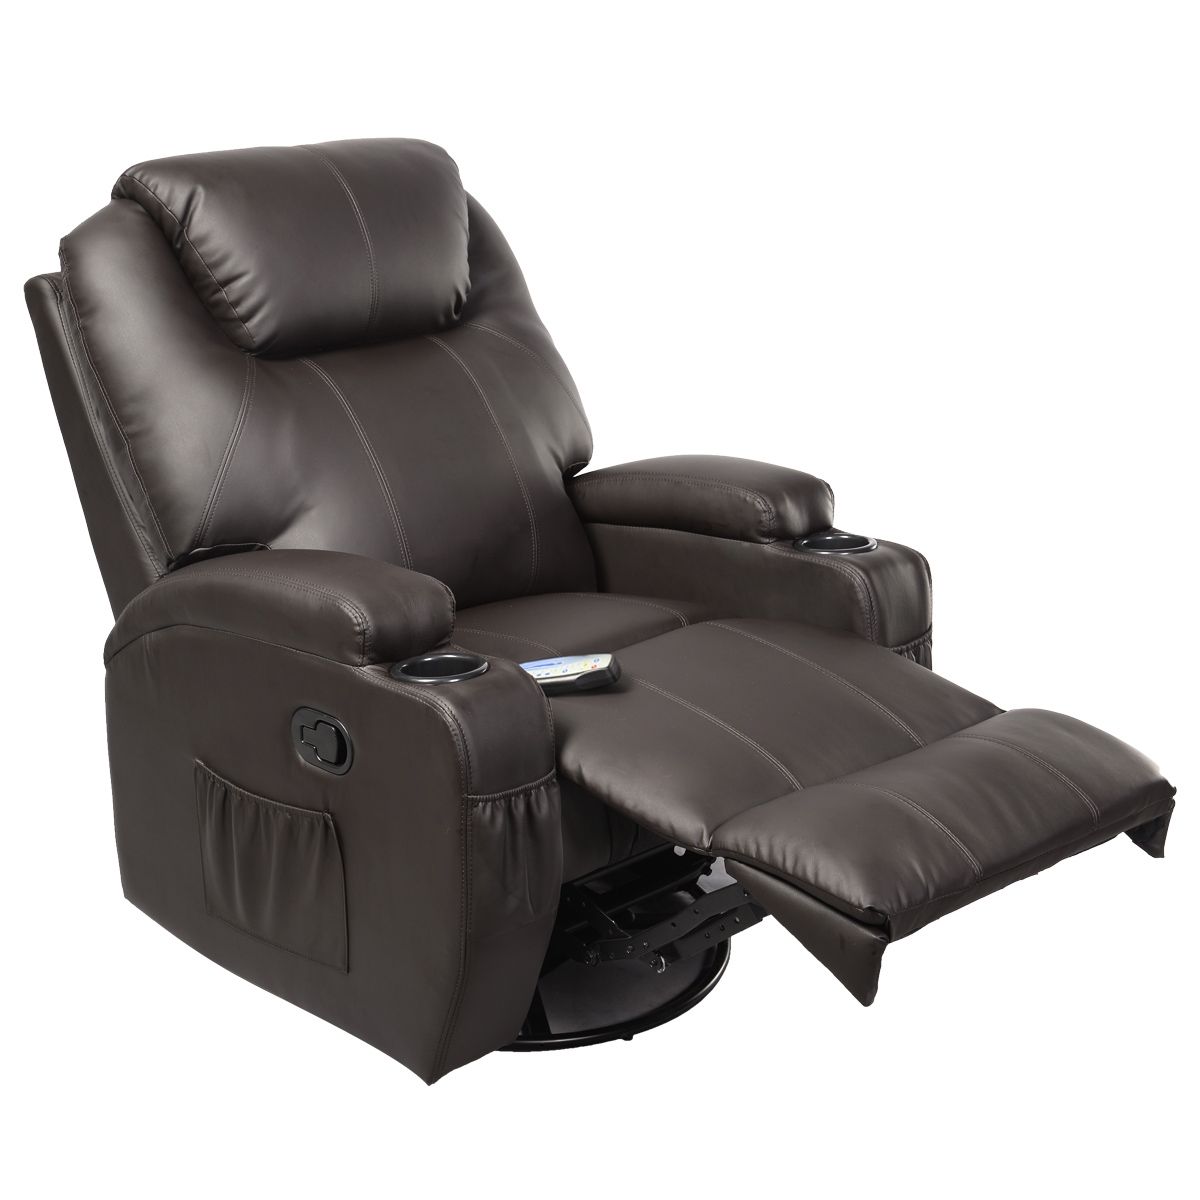 Costway Ergonomic Deluxe Massage Recliner Sofa Chair Lounge With Regard To Recliner Sofa Chairs (View 3 of 15)